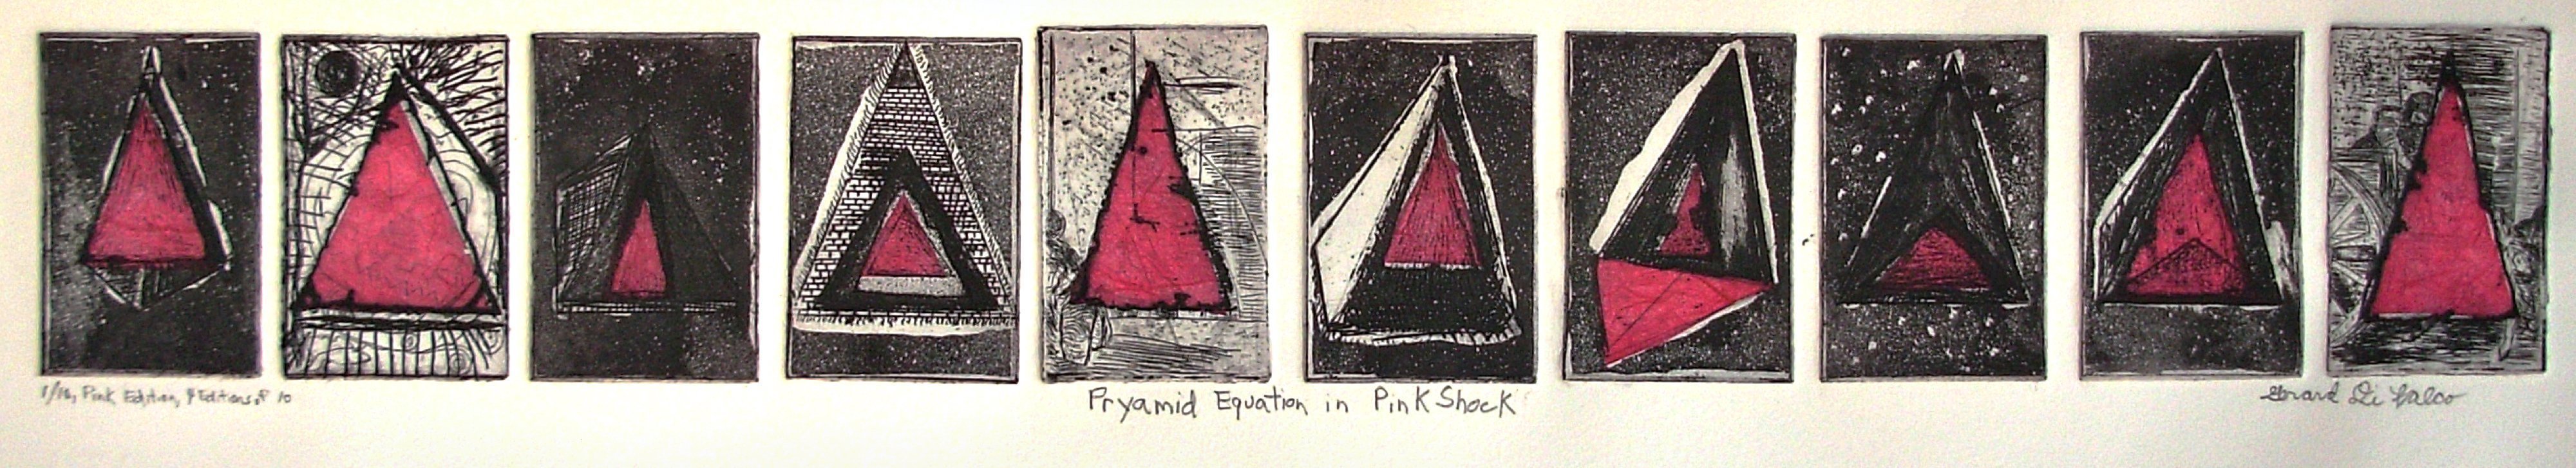 Jerry  Di Falco: 'Pyramidal Equation in Shocking Pink', 2012 Etching, Geometric. I used ten individual zinc plates, which were all placed on the printing press in a horizontal line. I used this method to achieve the rectangular relief- effect that the individual plates impress into the paper. My etching techniques in this work include intaglio, drypoint, chine colle, and aquatint it ...